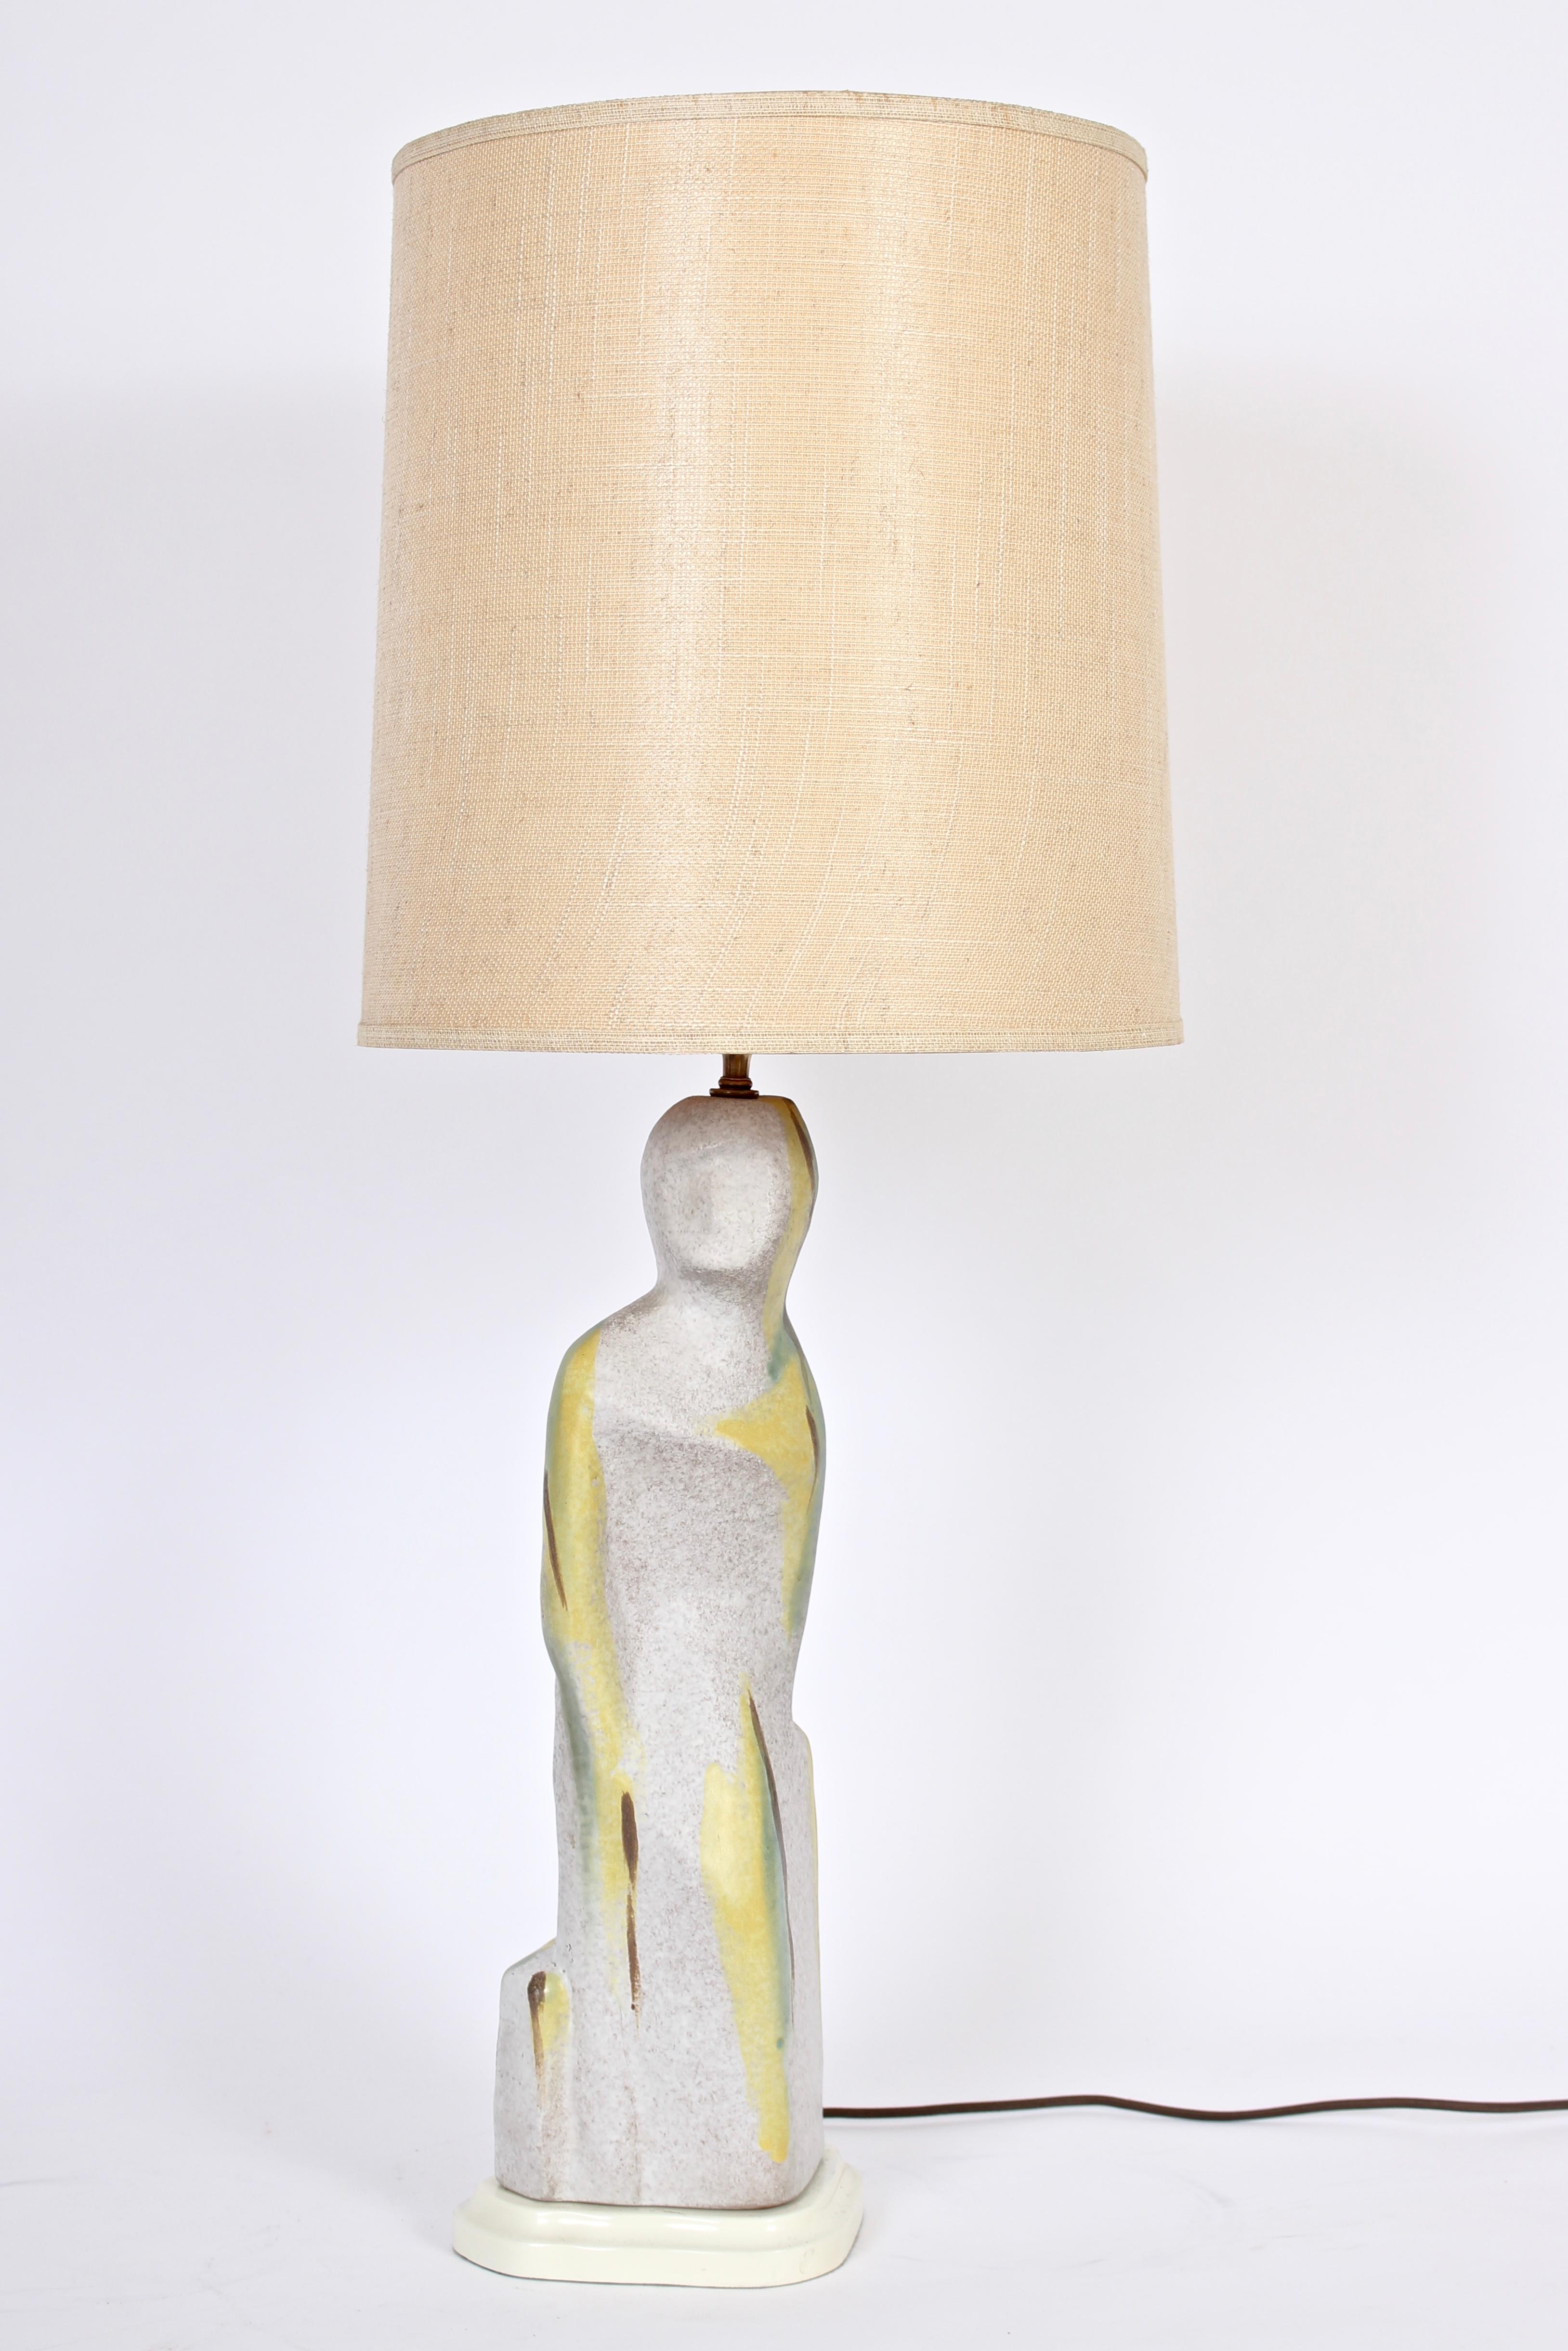 Bright handcrafted Marianna von Allesch style Cream & Yellow glazed ceramic table lamp, circa 1950. Featuring a female form, white background and pebble finish detailed with yellow, green and brown striping accents on cream lacquered wooden base.